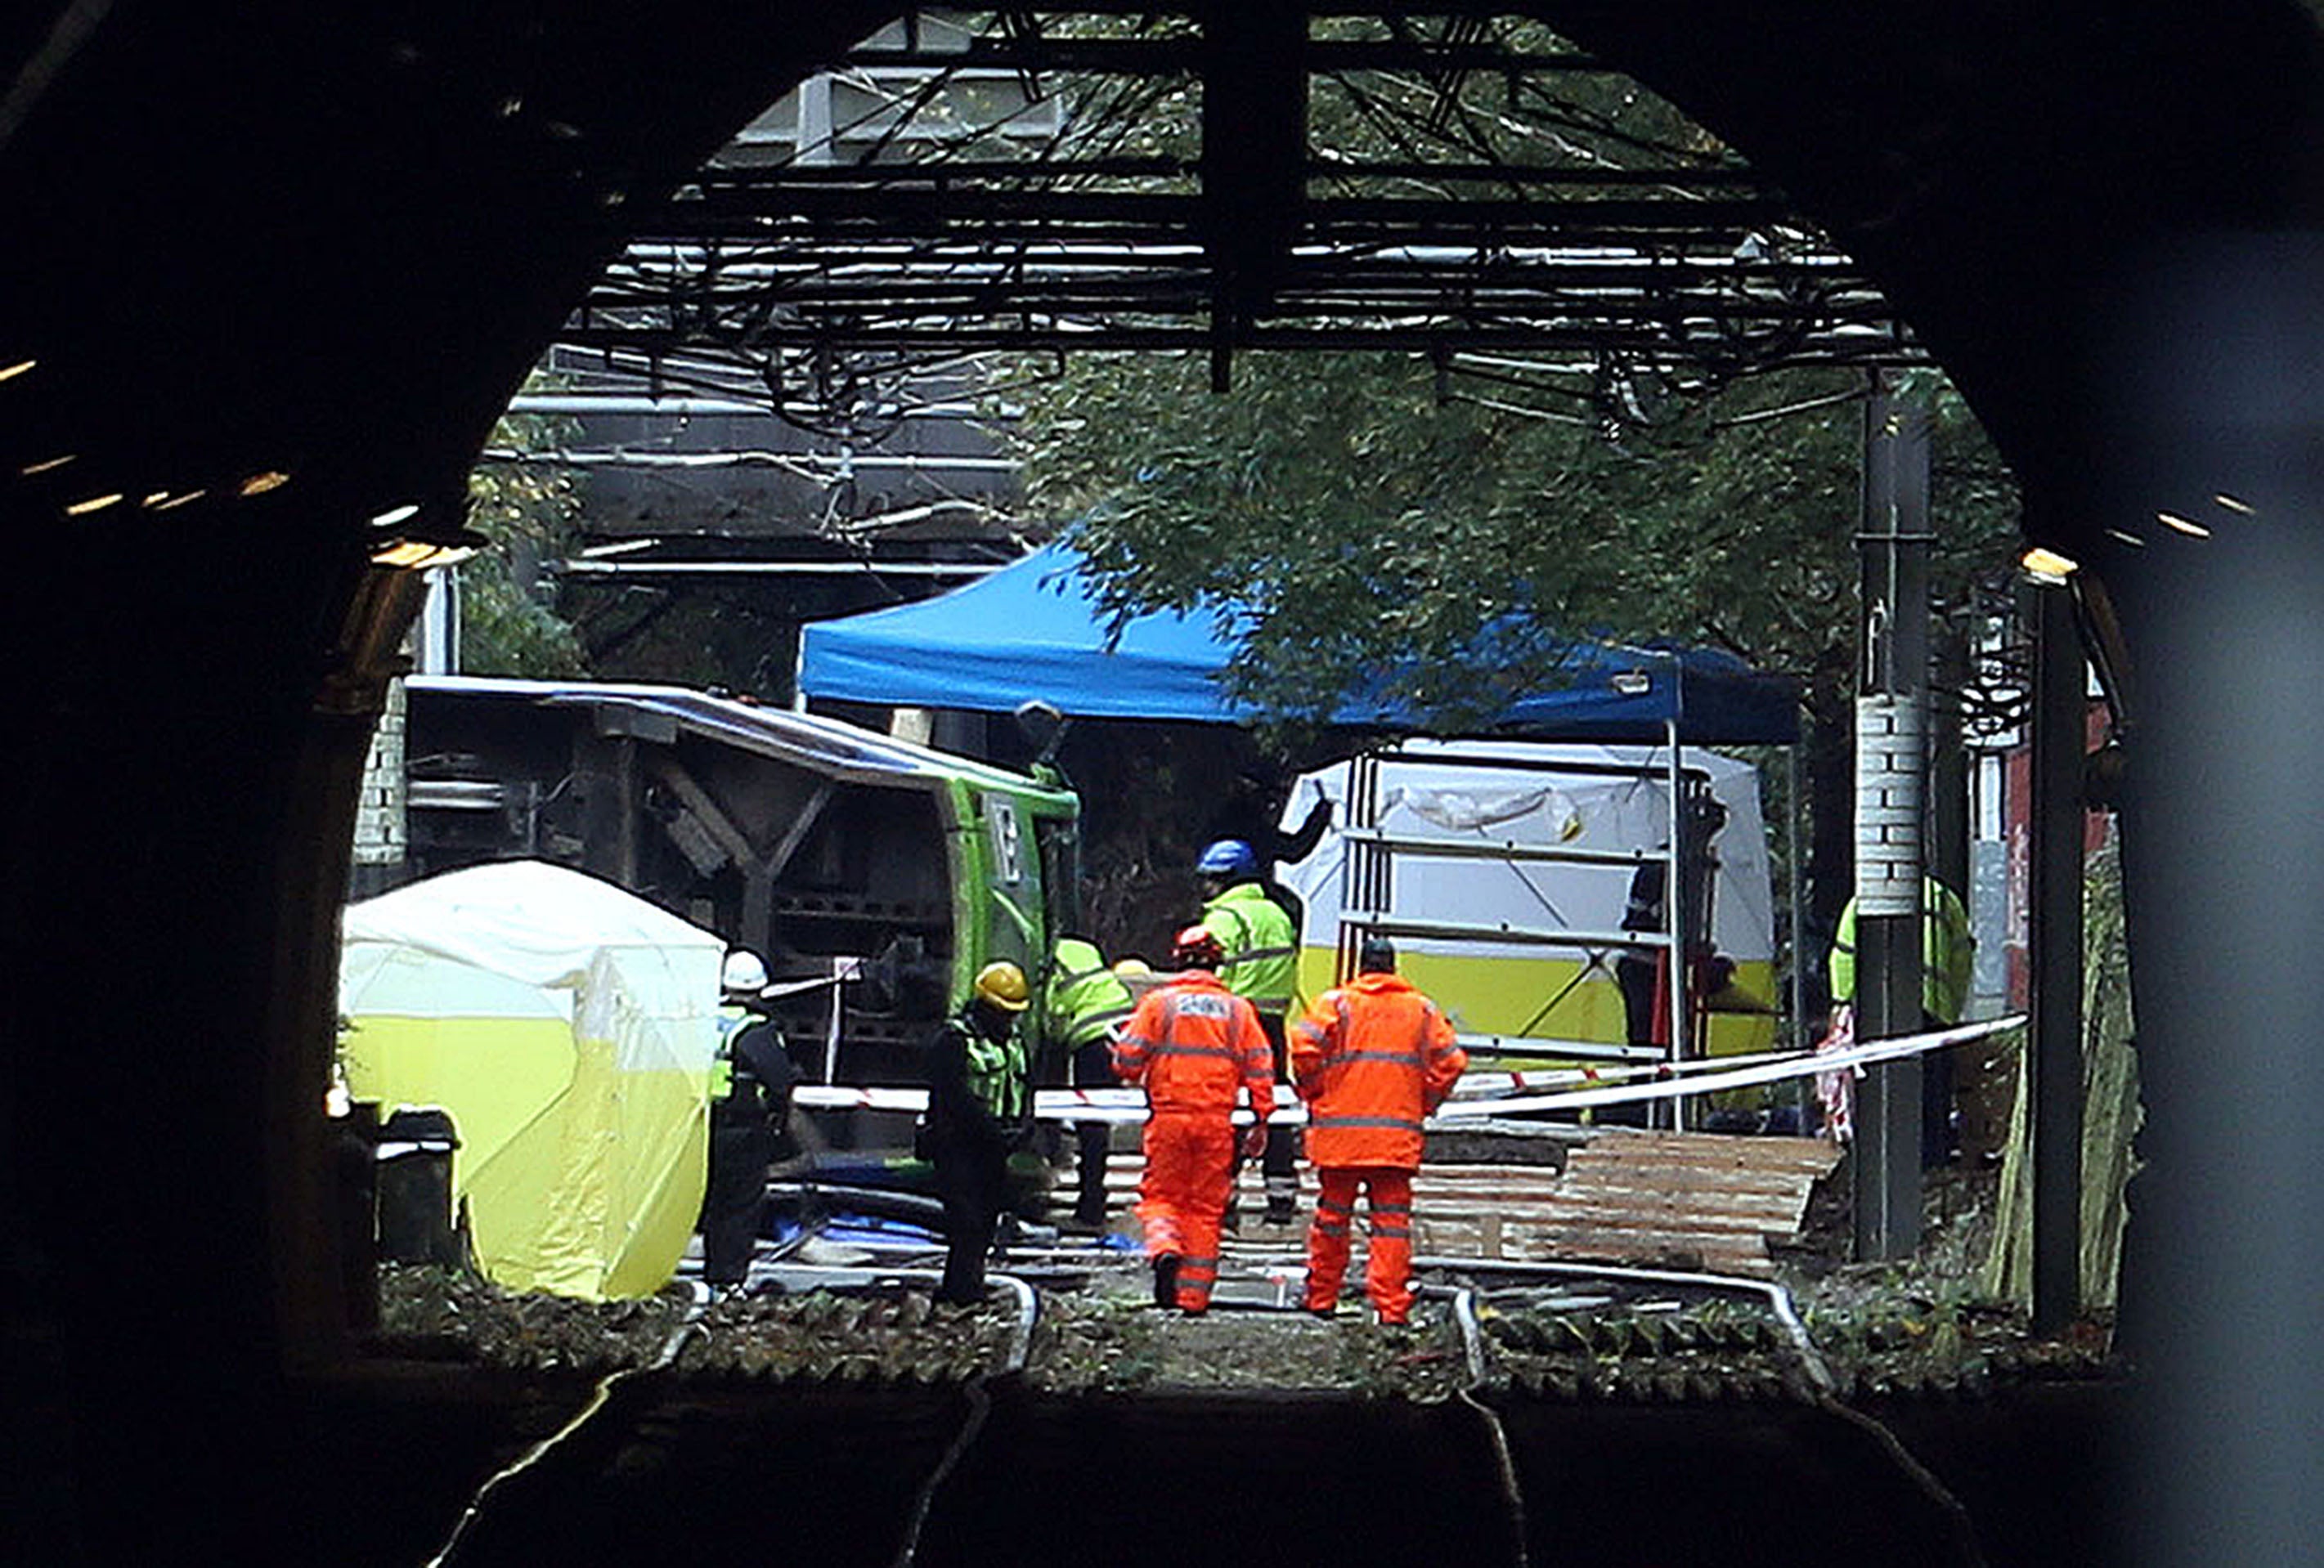 Prosecutions have been launched over alleged health and safety failings relating to the Croydon tram crash (Steve Parsons/PA)